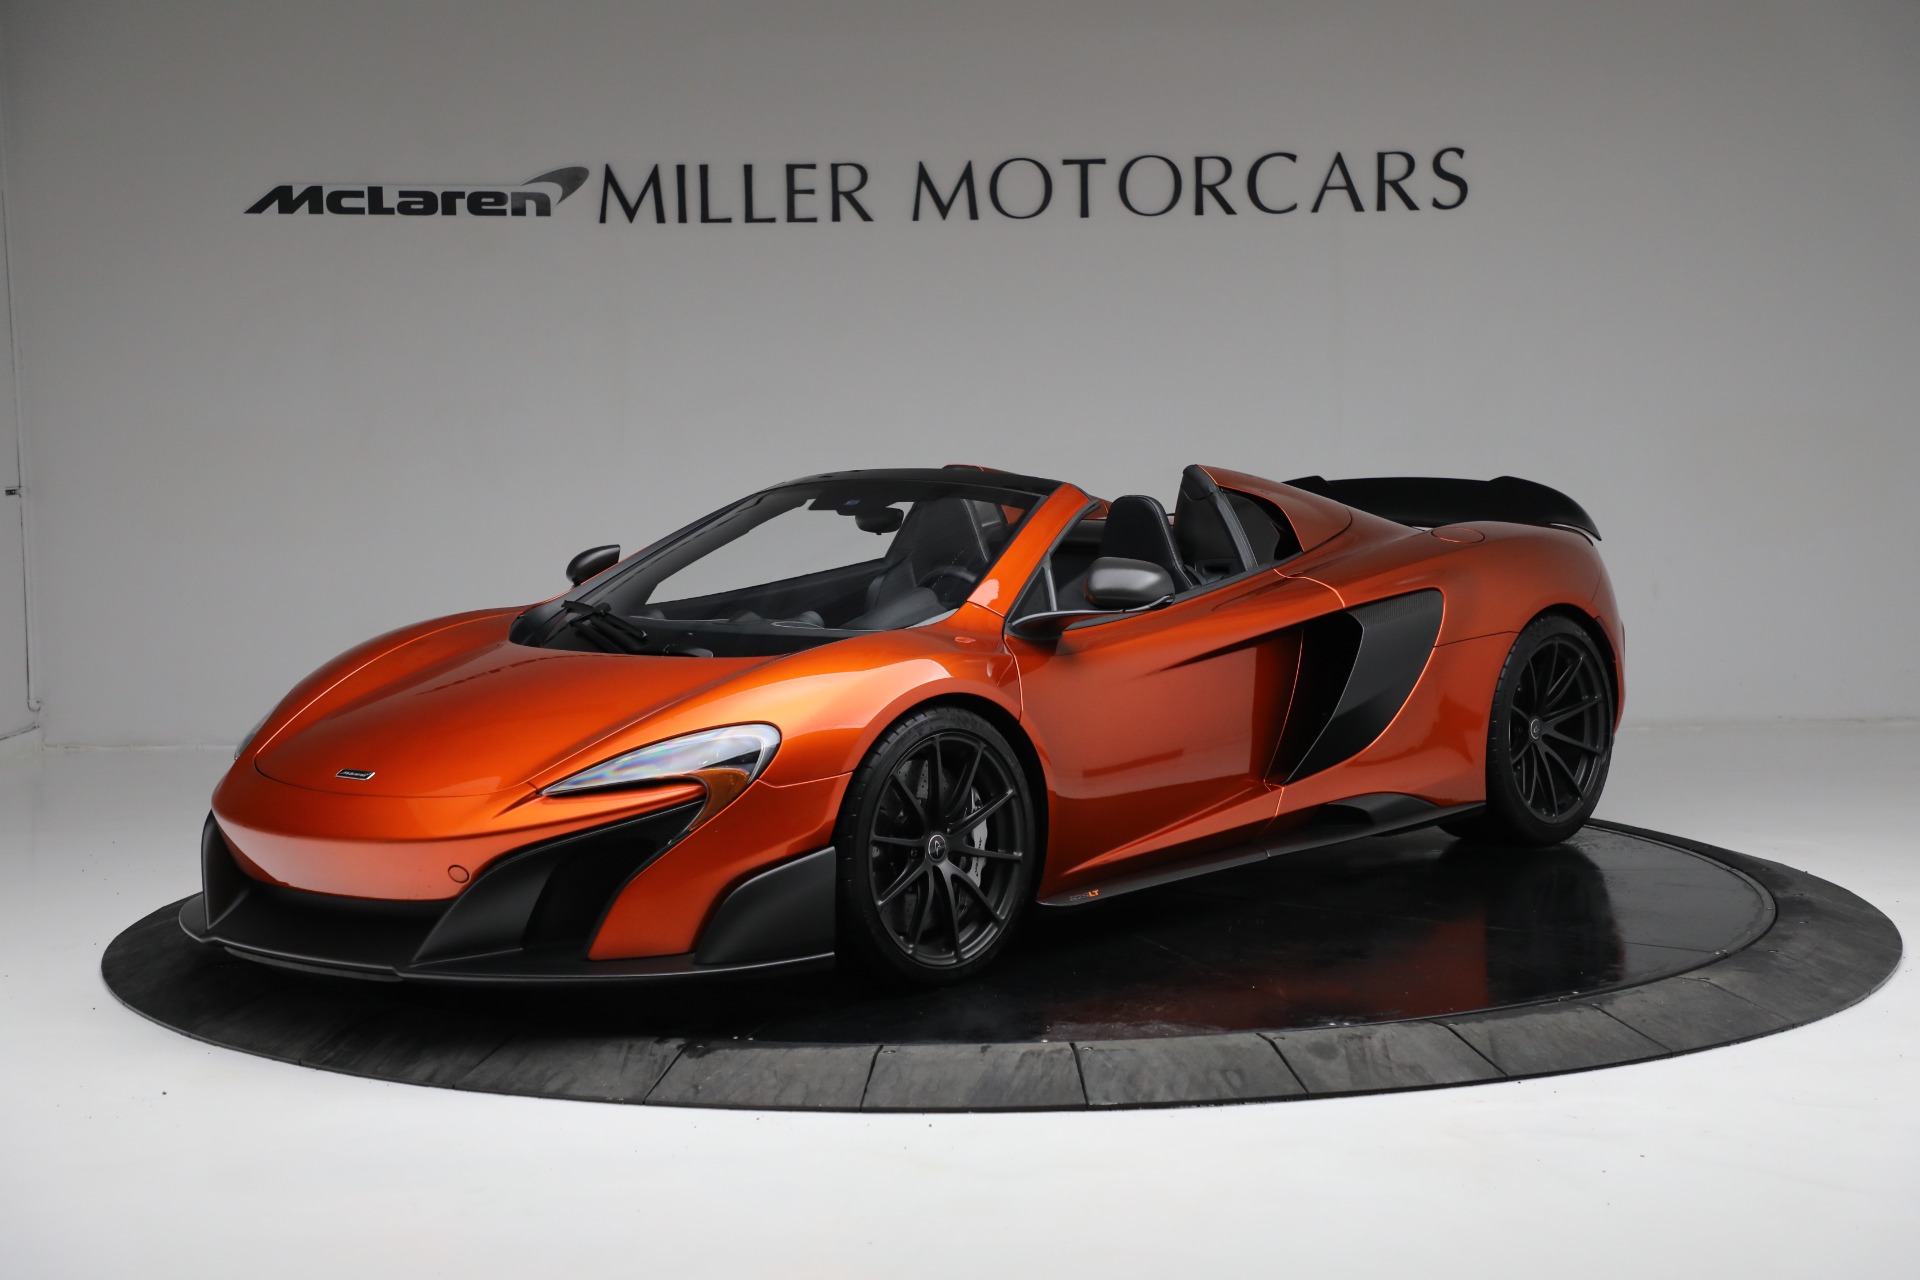 Used 2016 McLaren 675LT Spider for sale $299,900 at Bentley Greenwich in Greenwich CT 06830 1